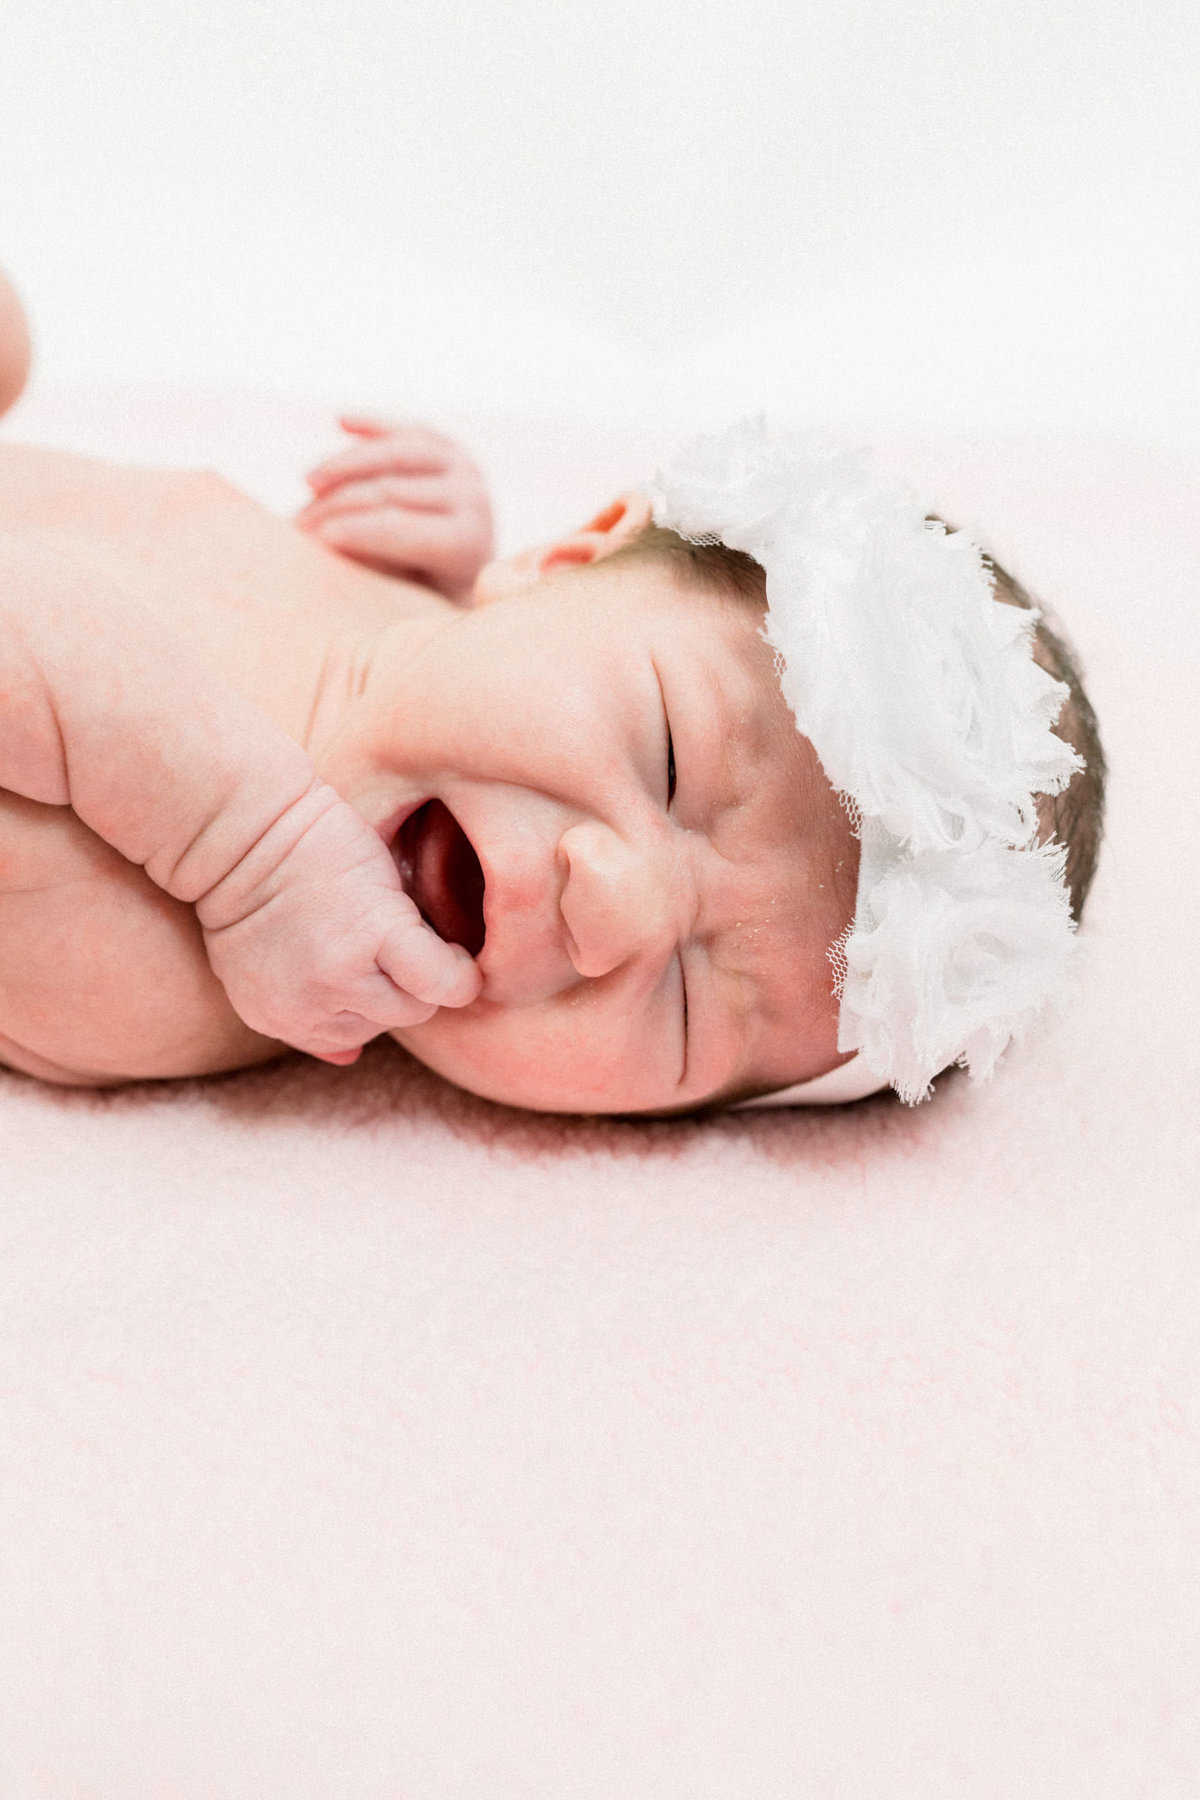 Baby begins to cry during her photo session